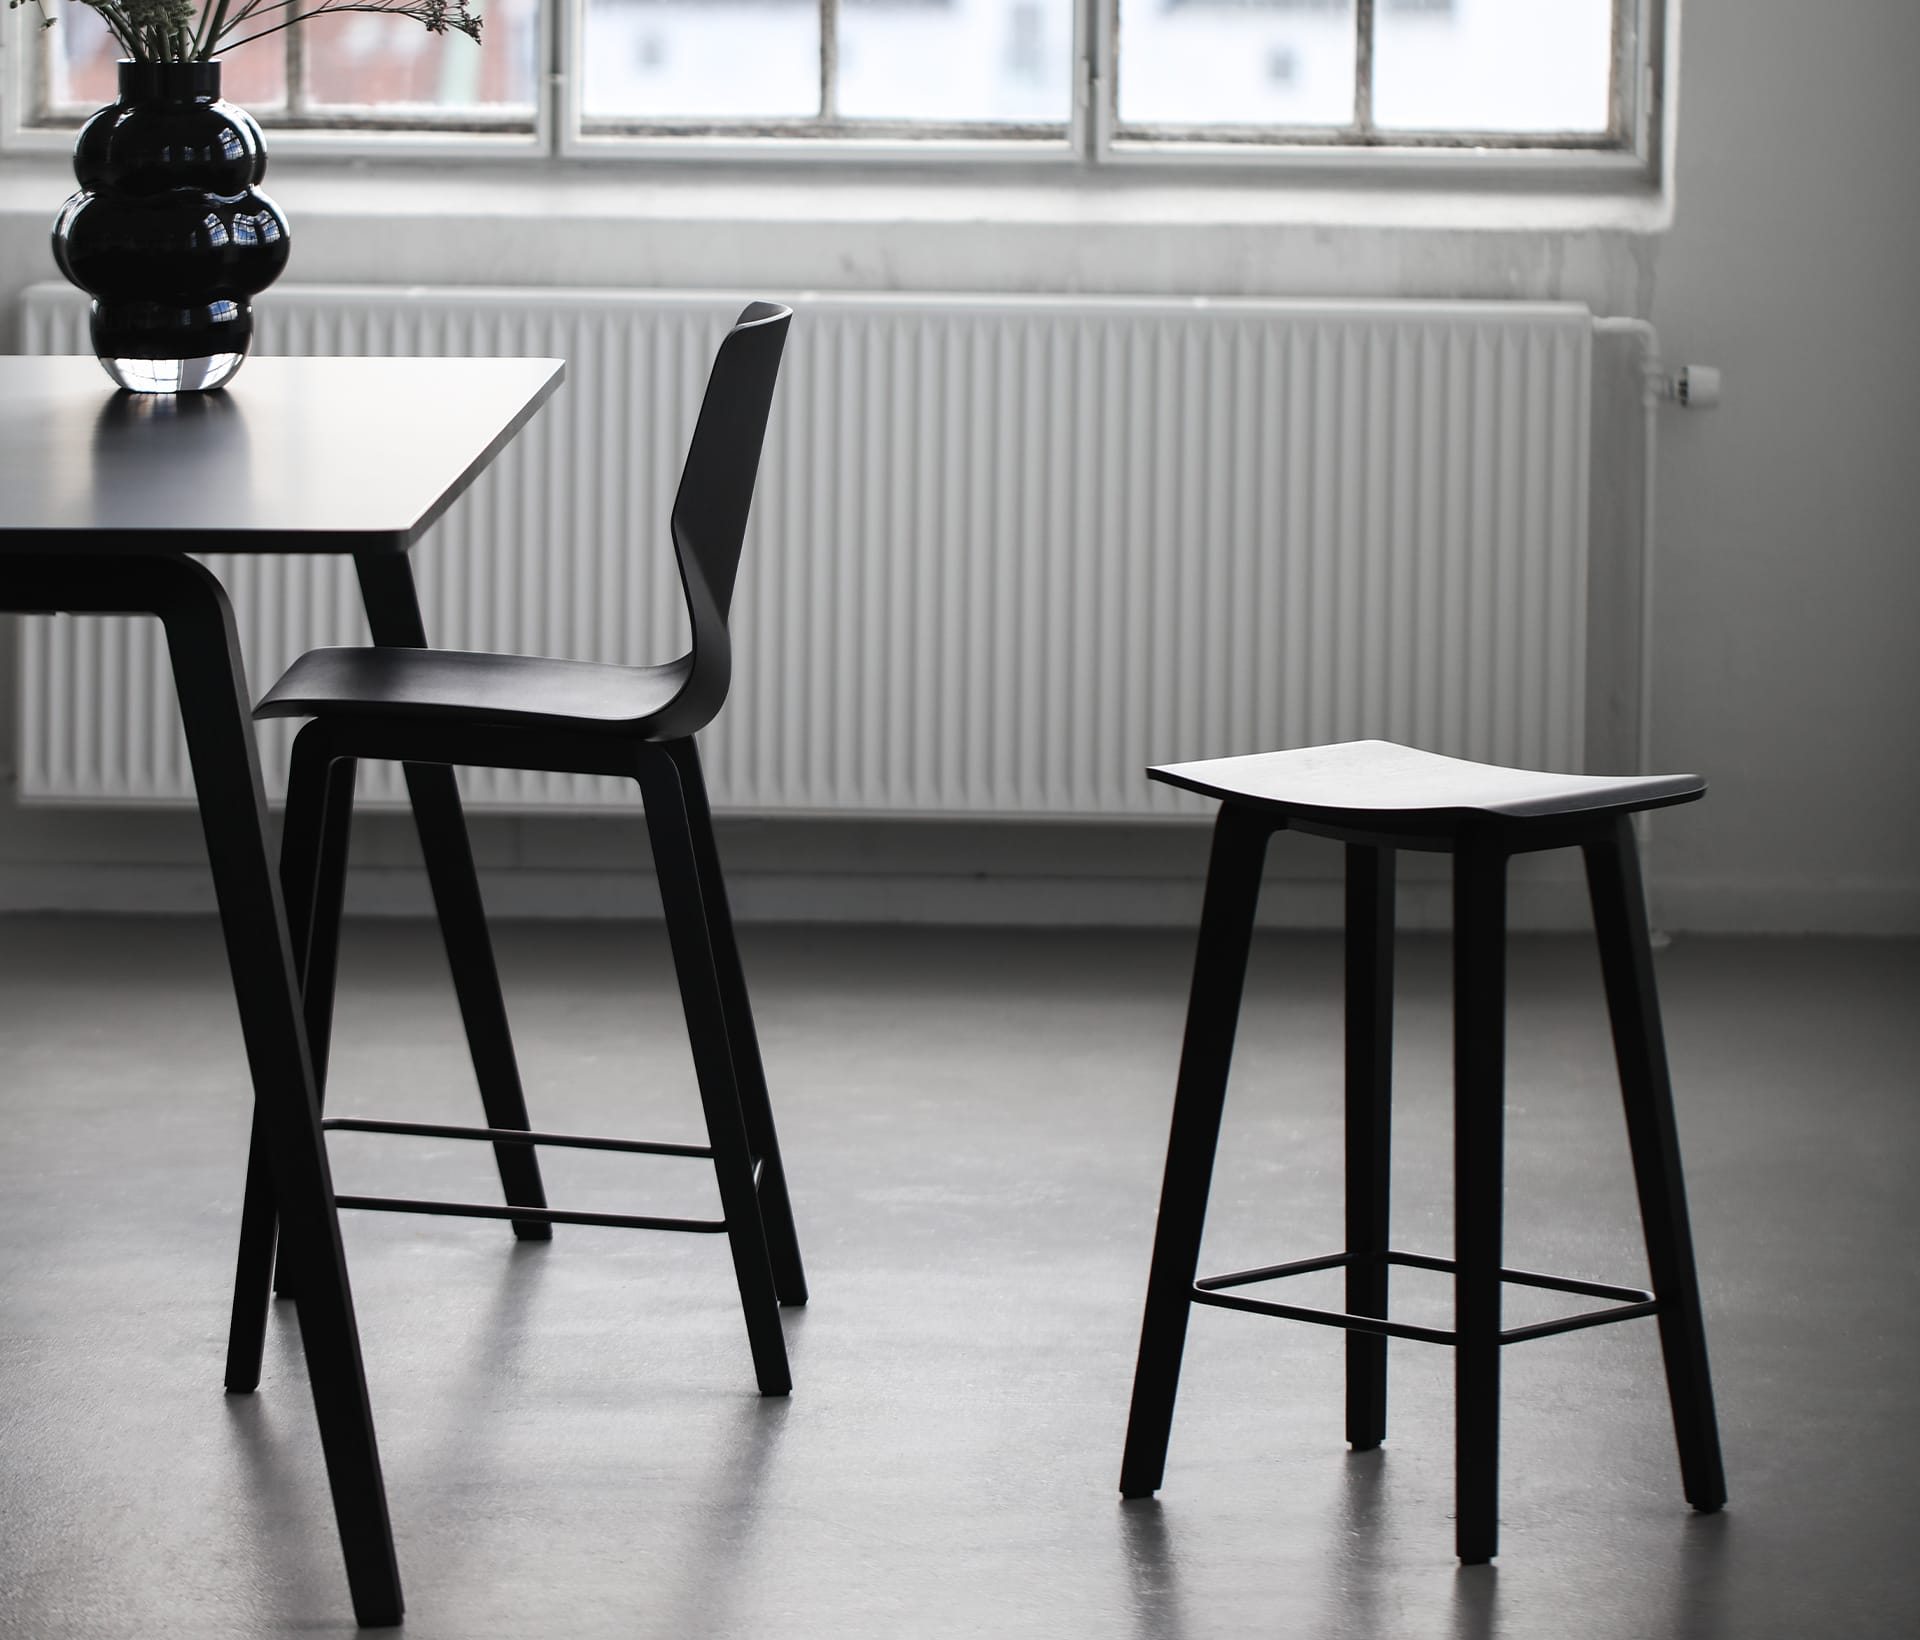 A dining table with two black stools in front of a window.